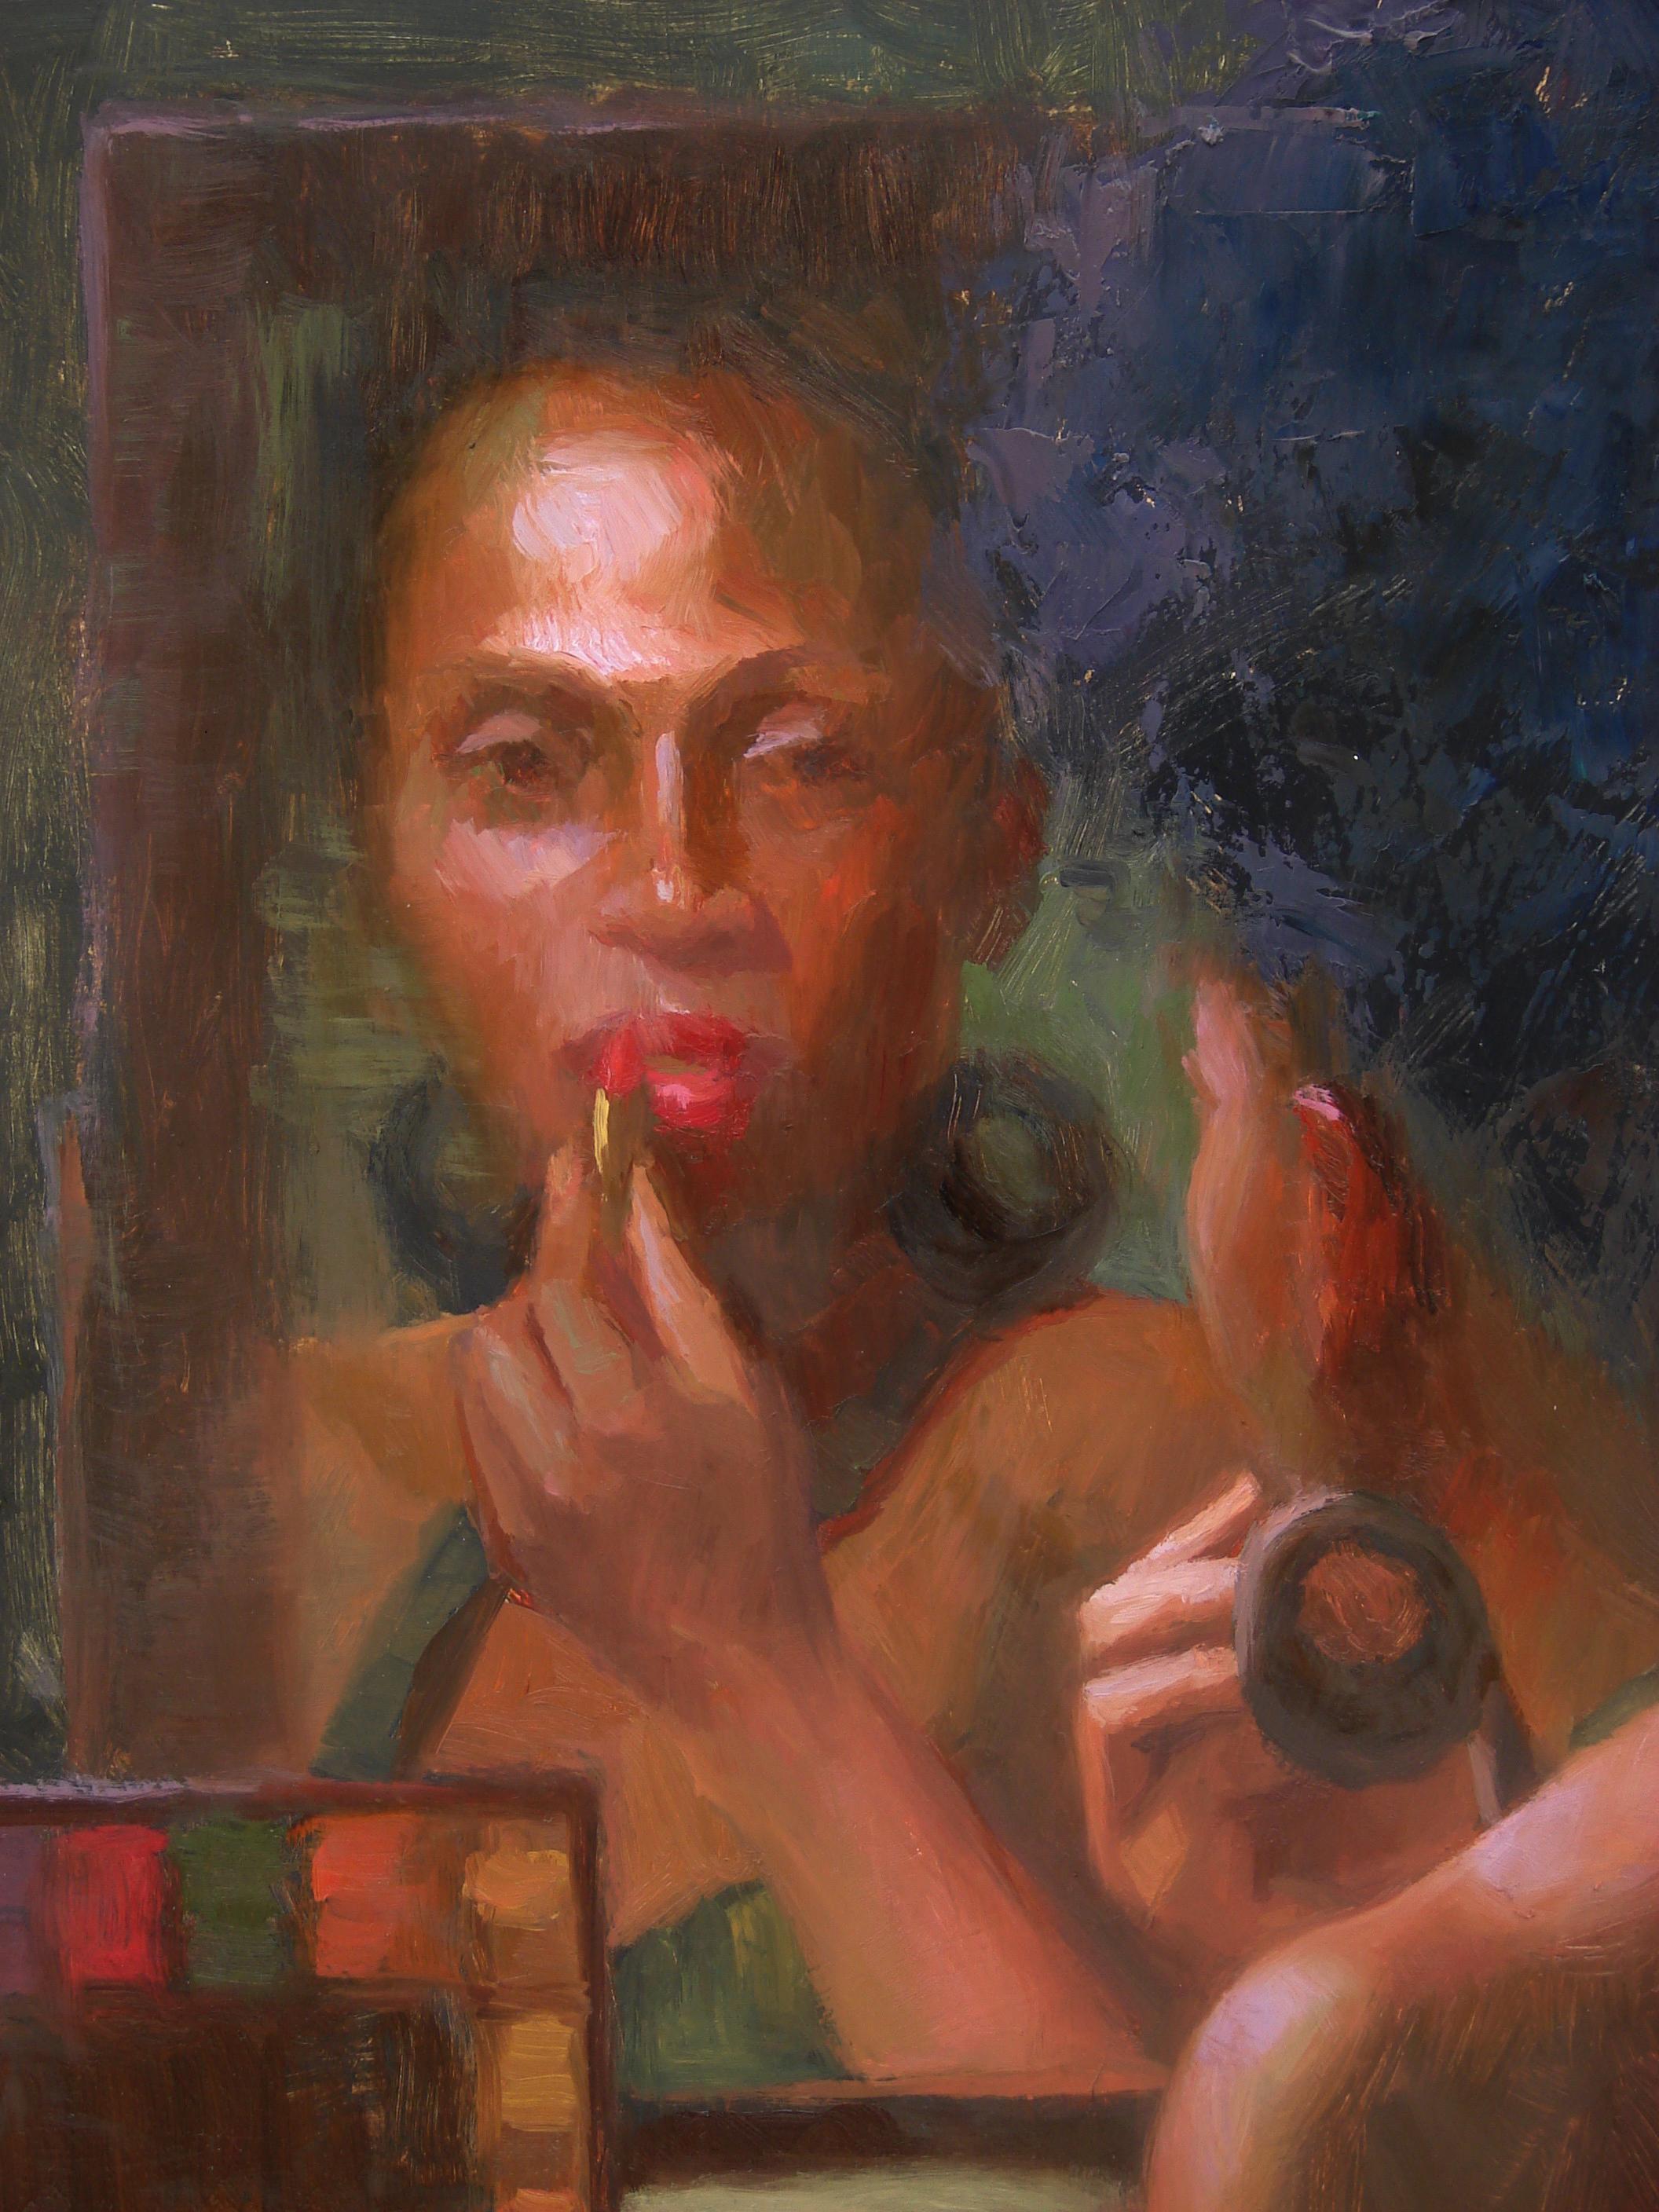 The Face in the Mirror - Black Figurative Painting by Sherri Aldawood